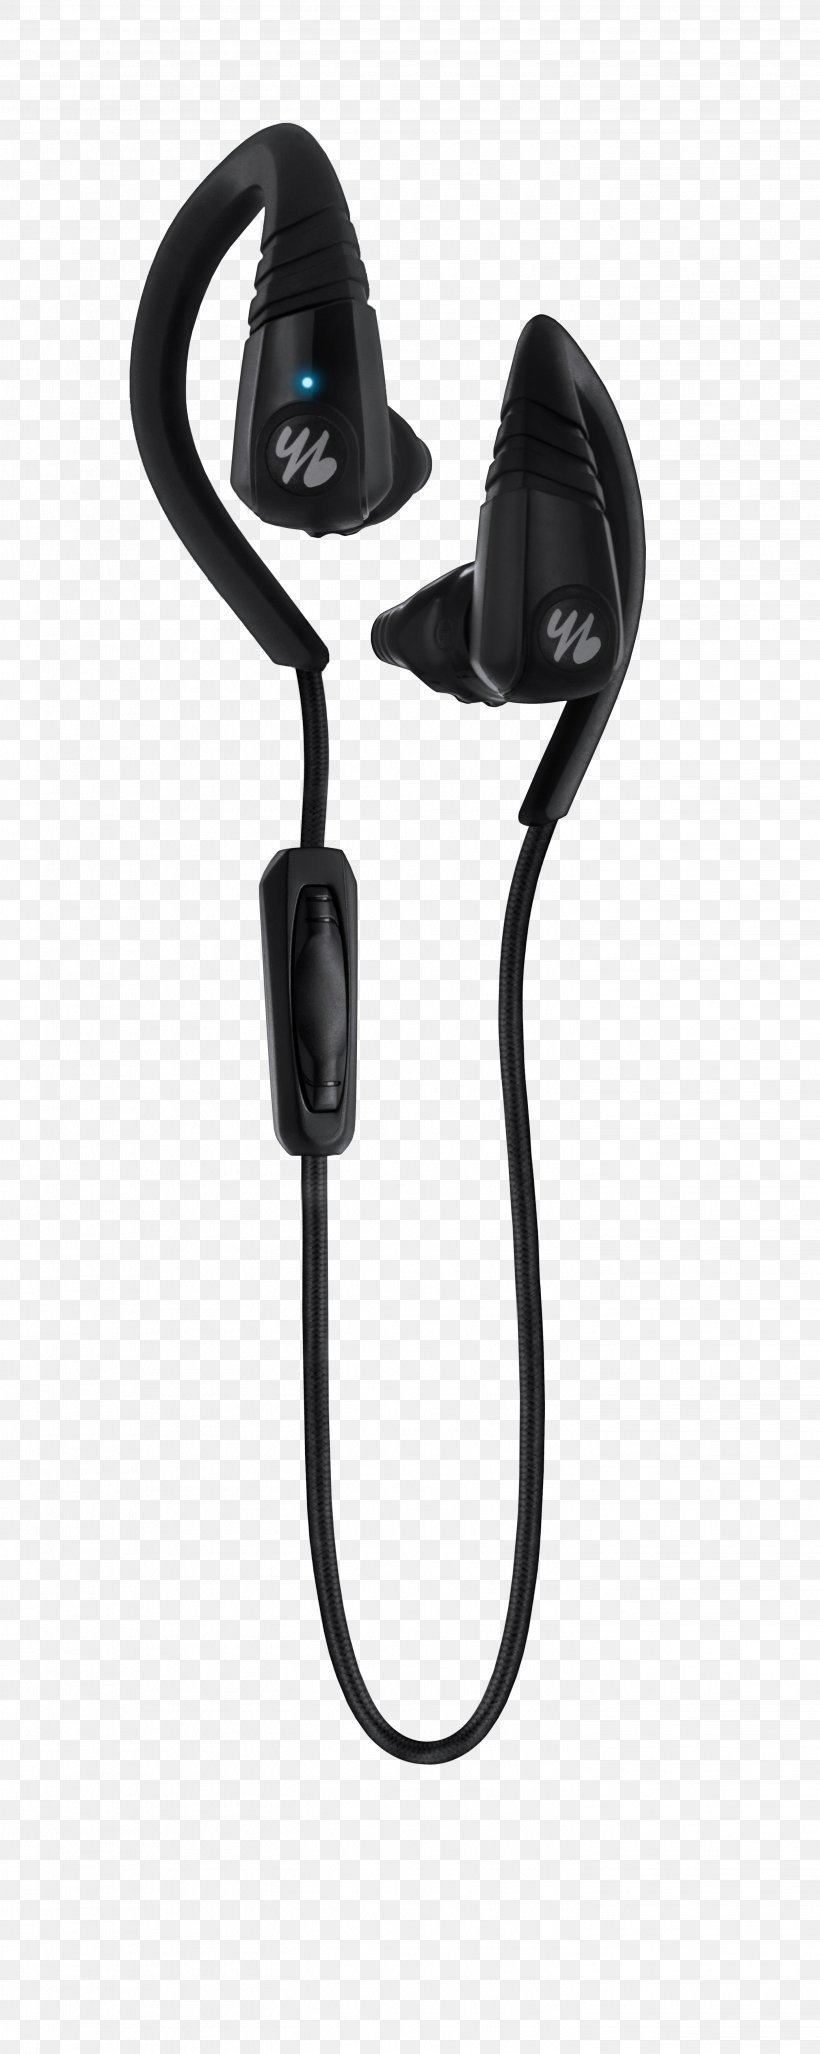 Headphones Microphone Yurbuds Leap Wireless JBL Yurbuds Liberty Bluetooth, PNG, 2901x7267px, Headphones, Audio, Audio Equipment, Bluetooth, Cable Download Free